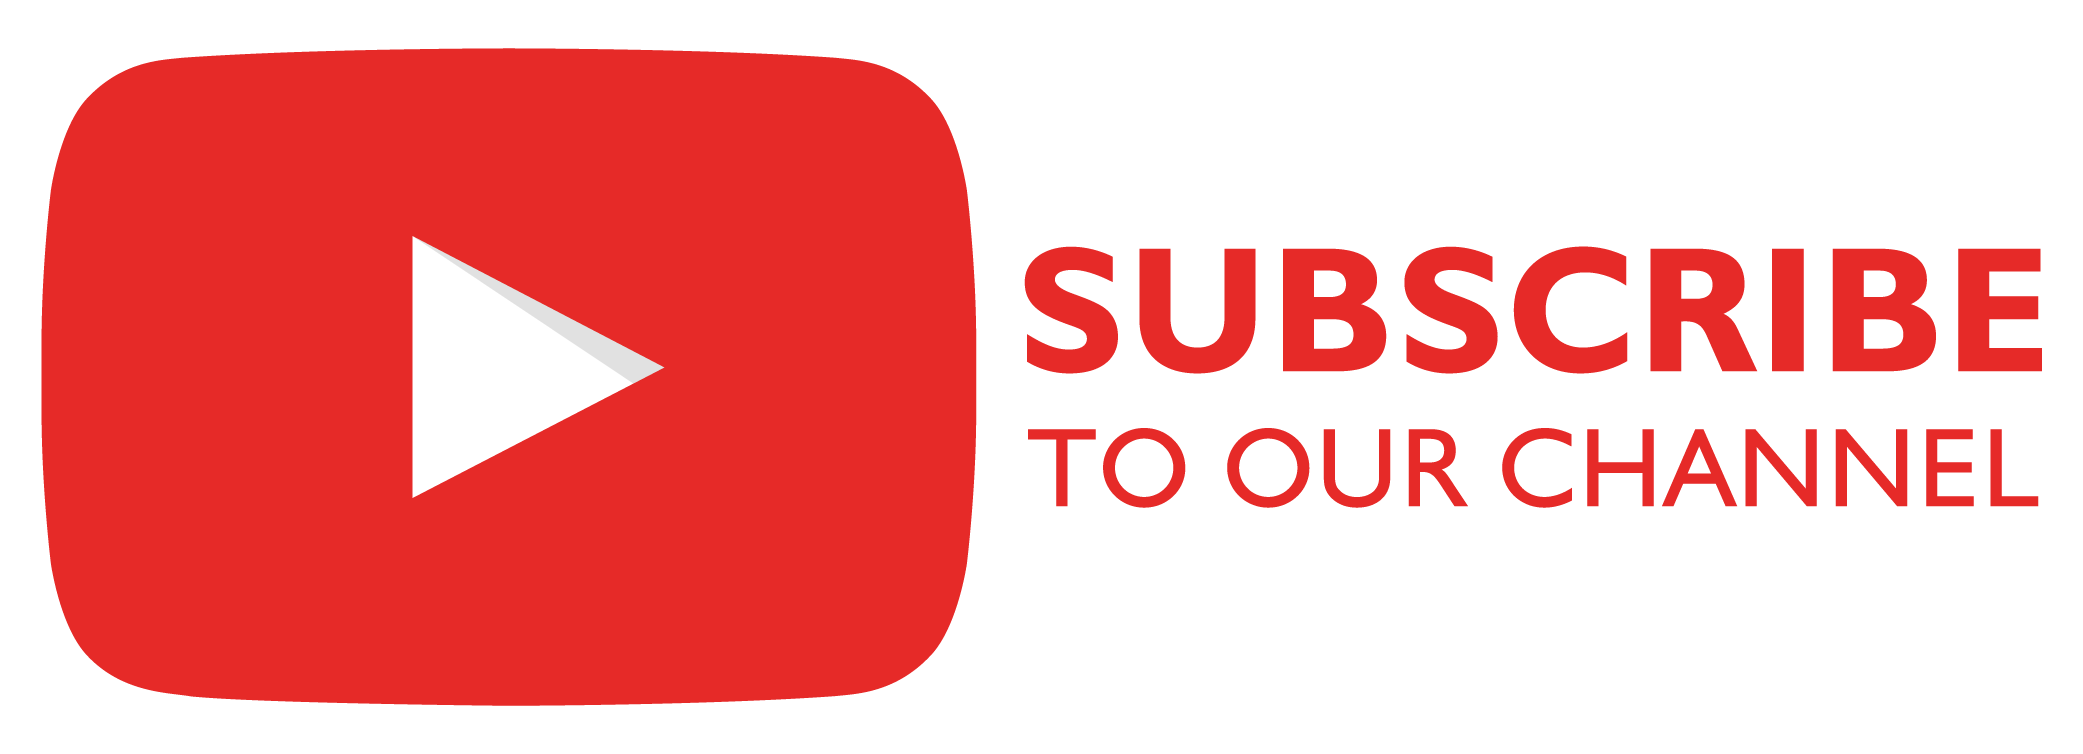 youtube subscribe icon png